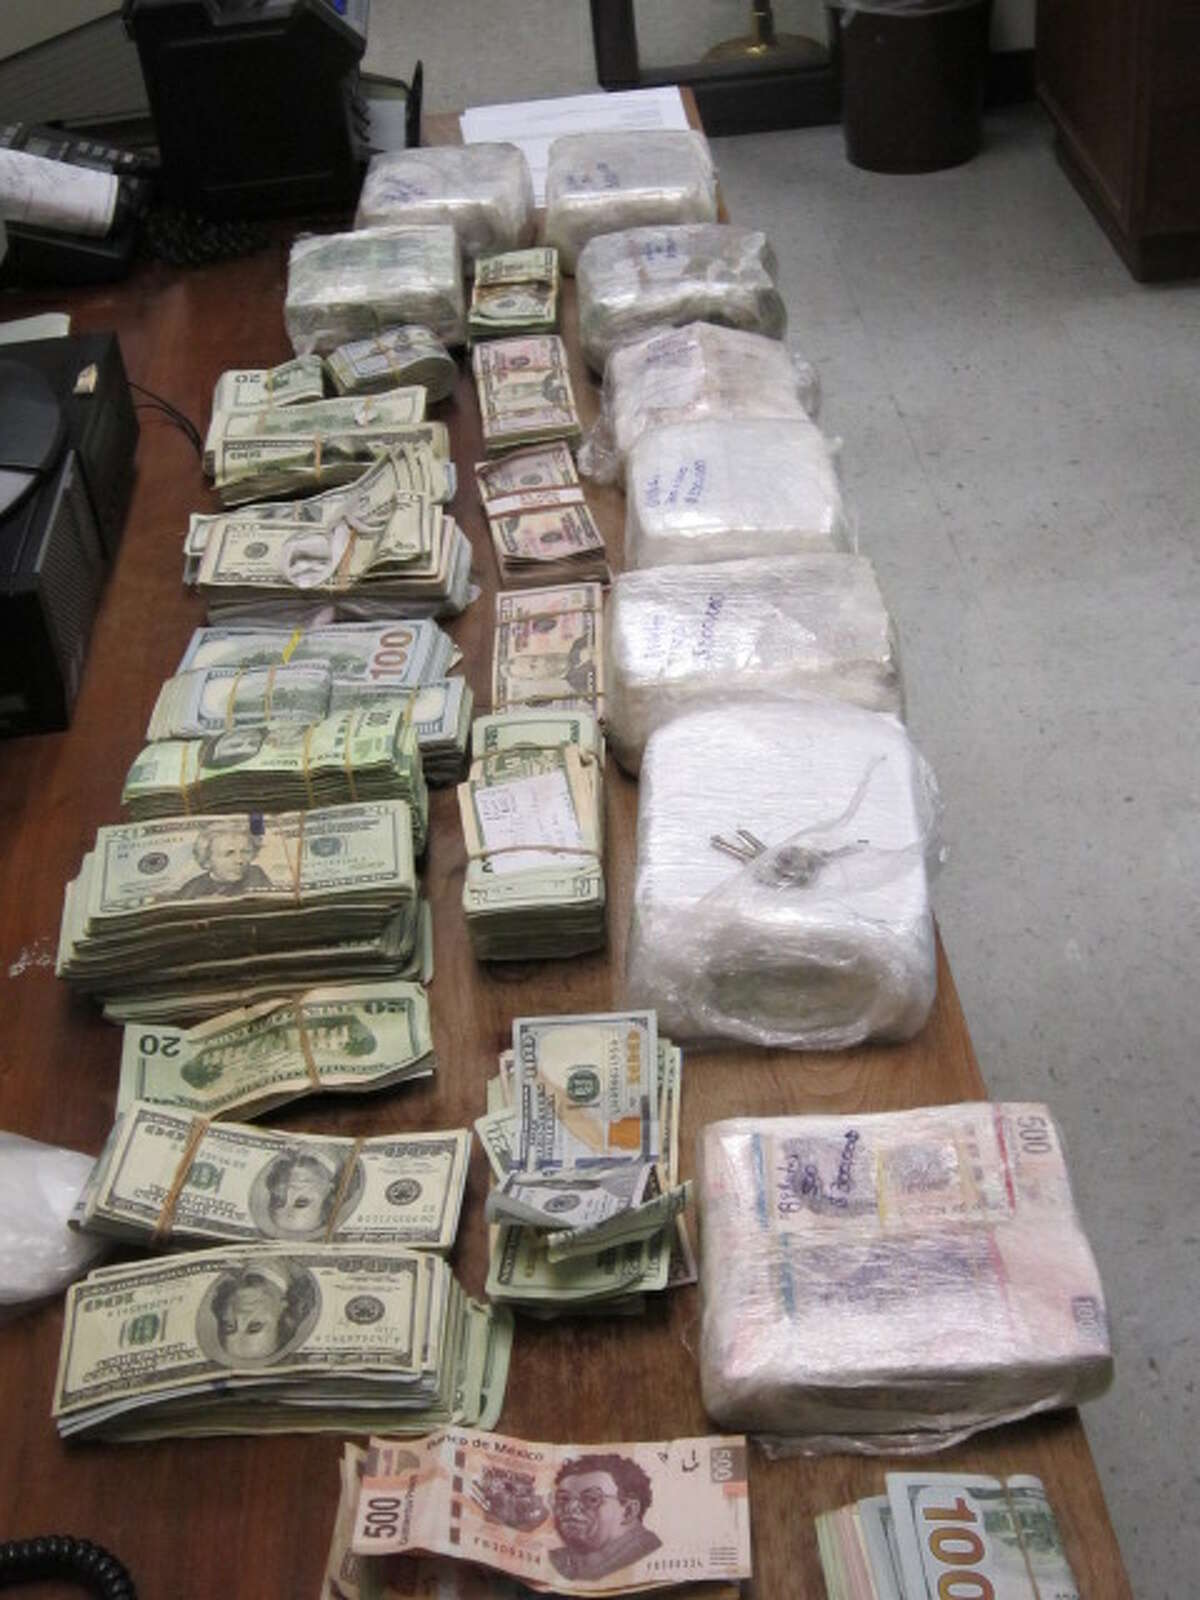 Four abandoned backpacks found by U.S. Border Patrol agents in the Rio Grande Valley Thursday contained more than $650,000 in cash and a kilogram of cocaine.  To see some of the biggest Texas drug busts, click through the slideshow.